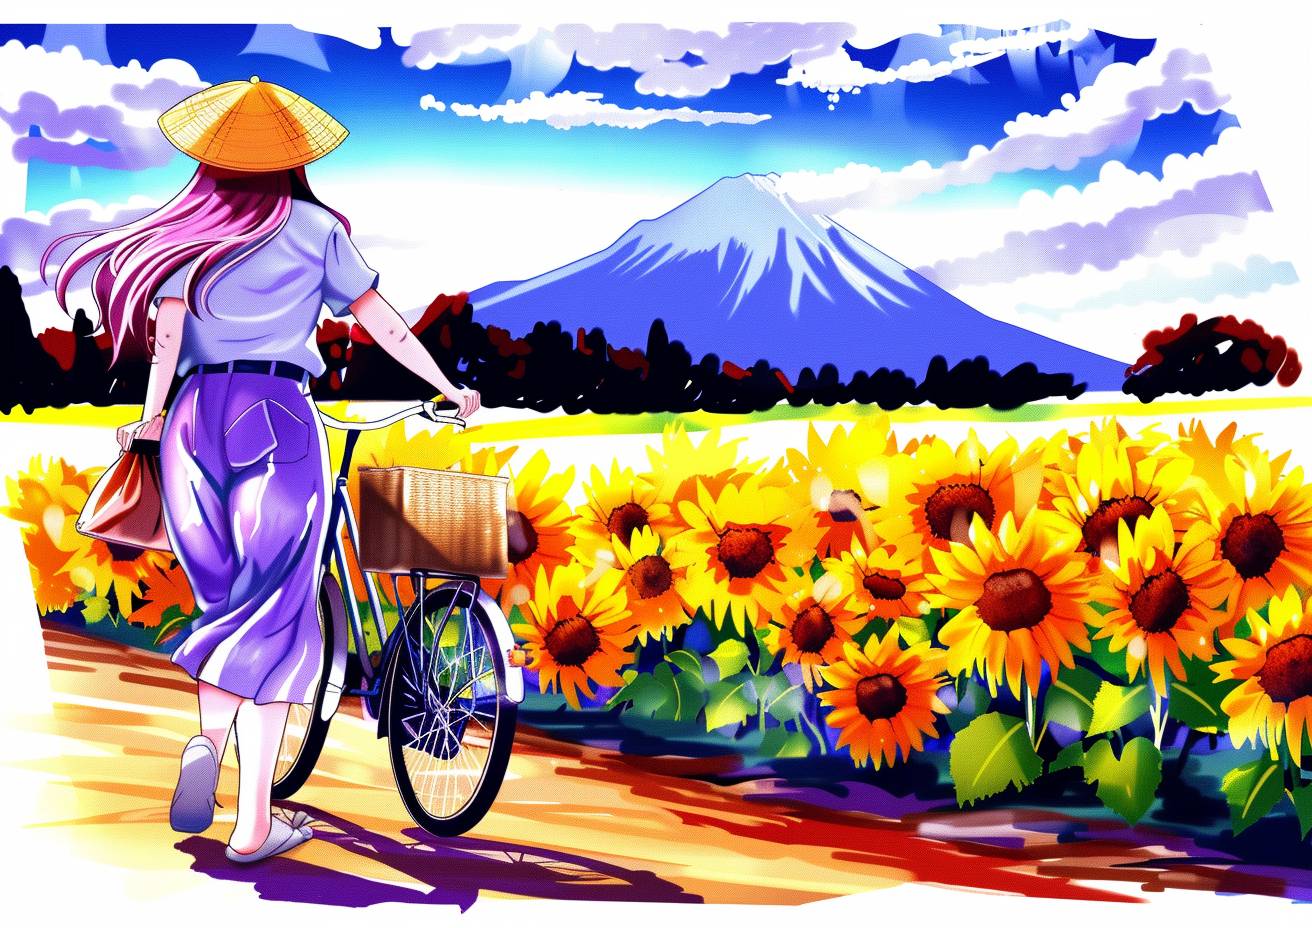 A French woman walking her bicycle, a field of sunflowers along a dirt road